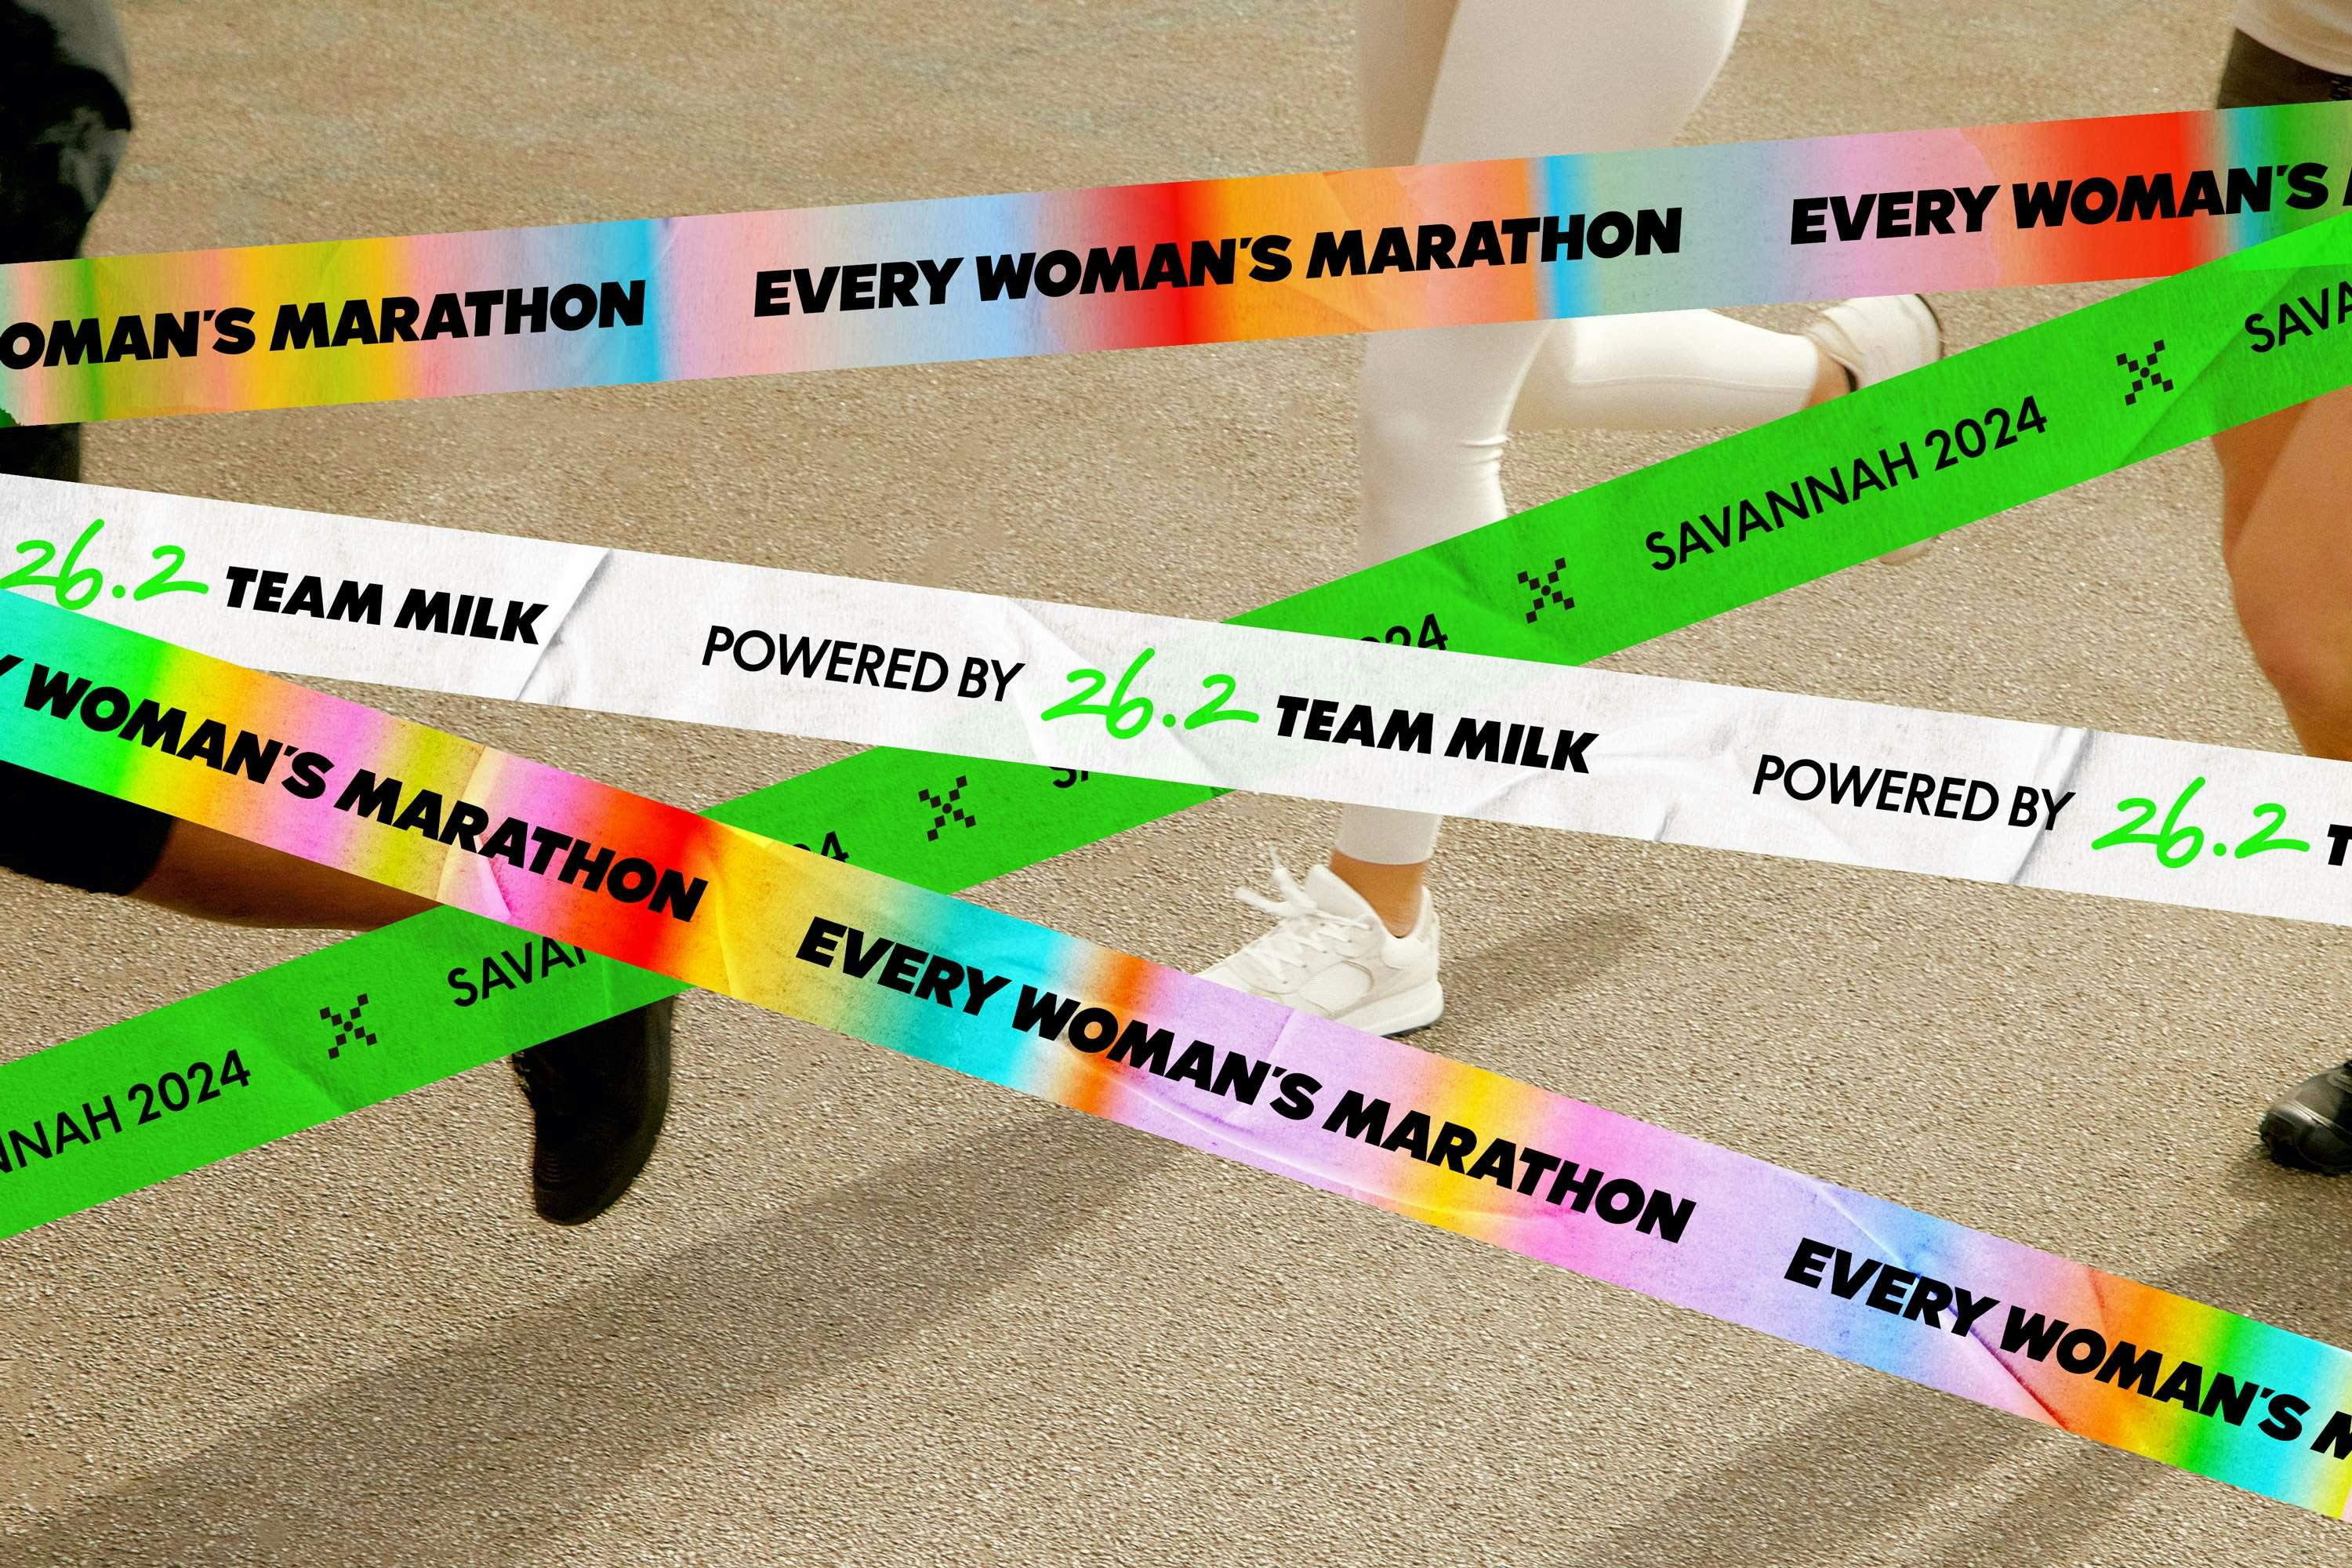 Brand banners — Powered by 26.2 Team Milk; Every Woman's Marathon Identity; and, Savannah 2024 repeated